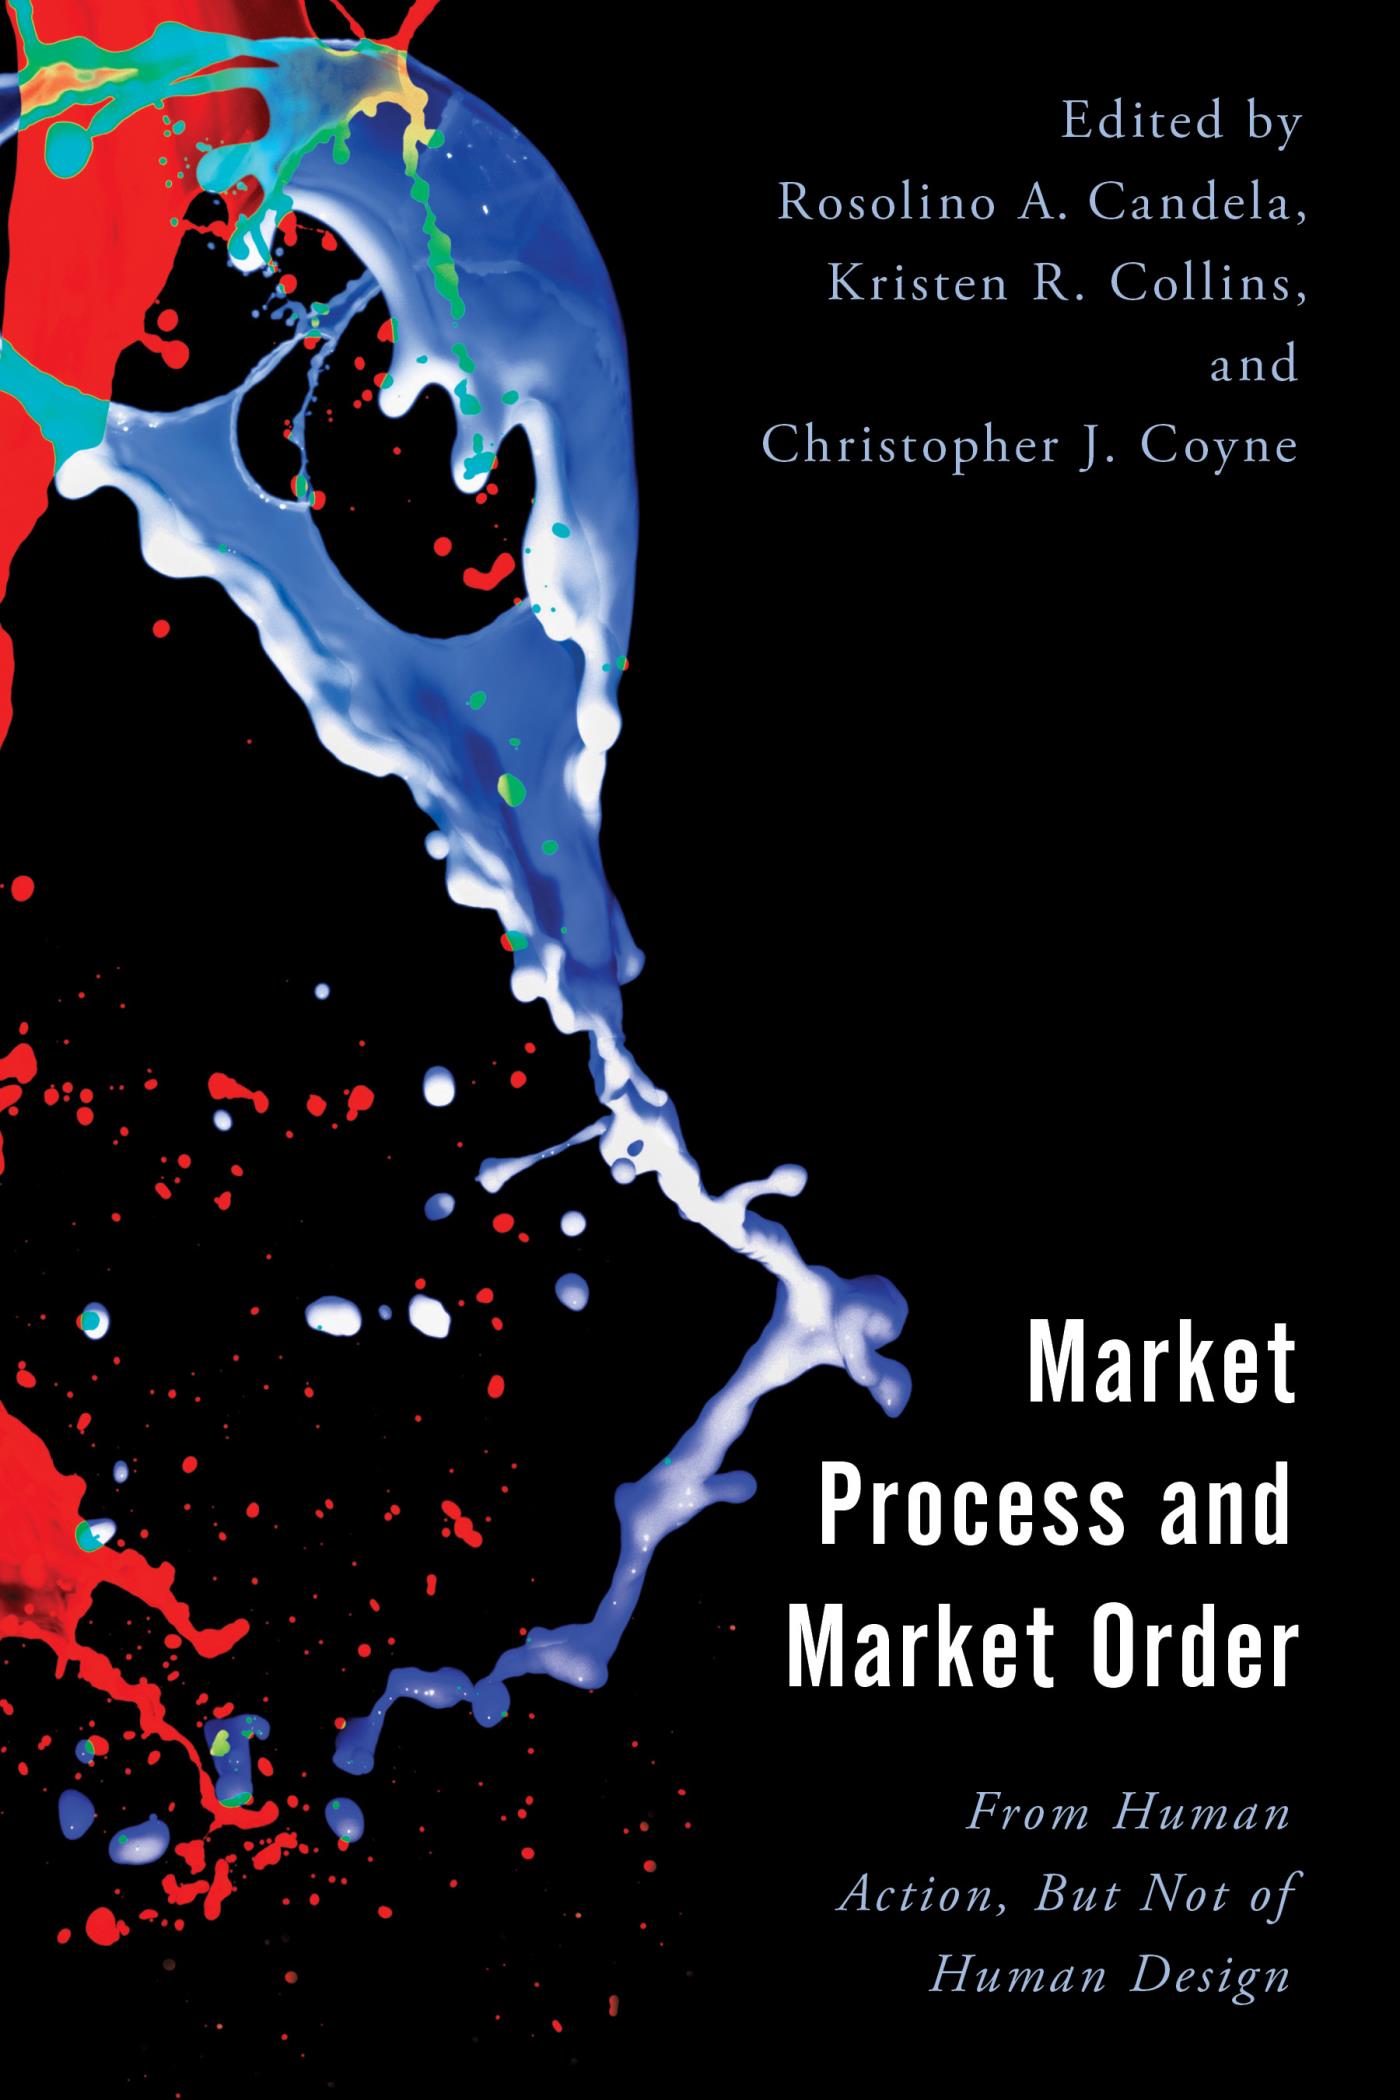 Market Process and Market Order